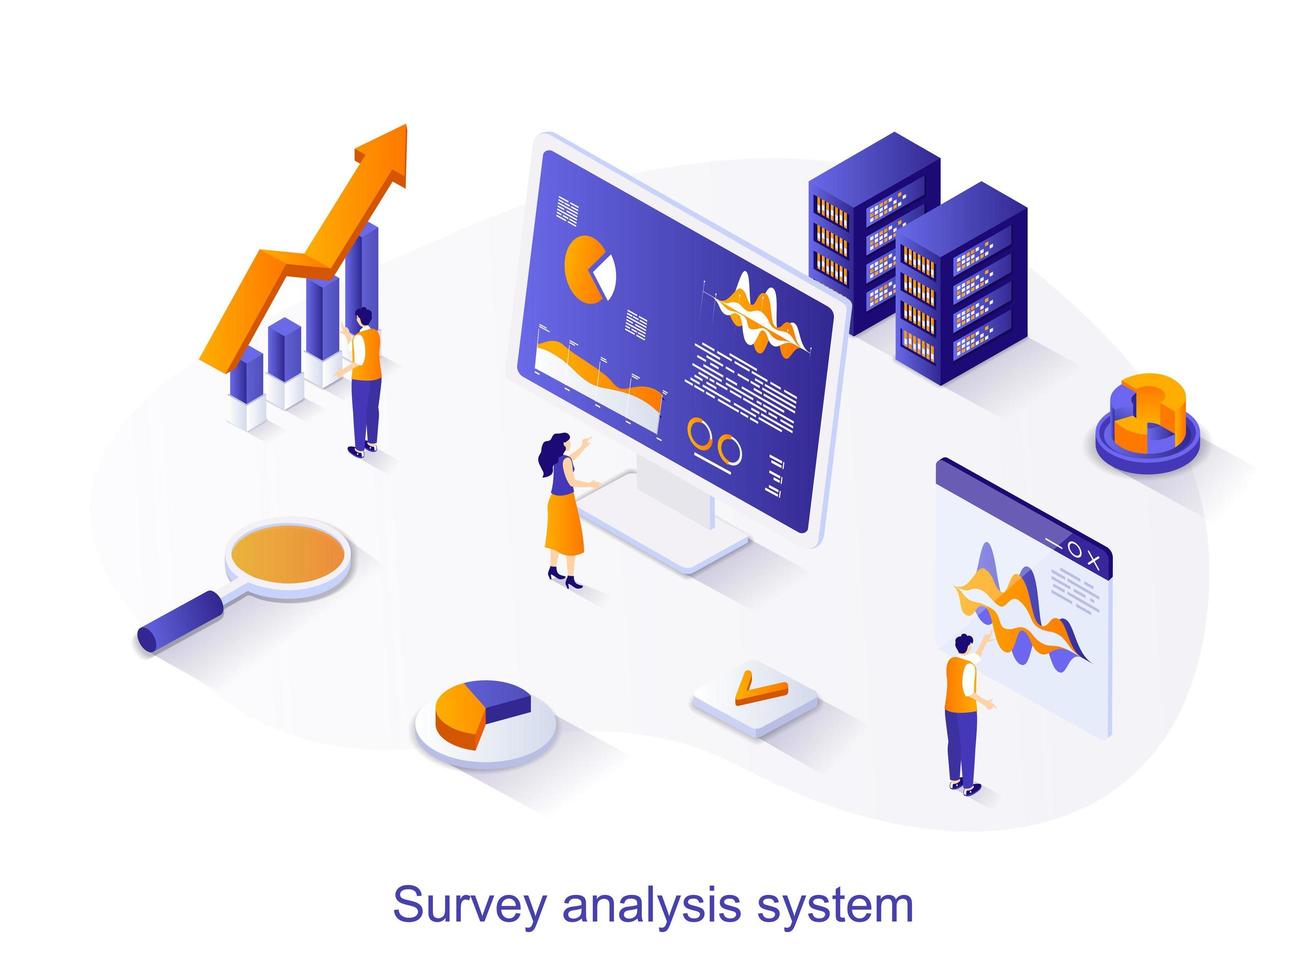 Survey analysis system isometric web concept. People analyze data from customer opinion questionnaires, research data, work with databases scene. Vector illustration for website template in 3d design